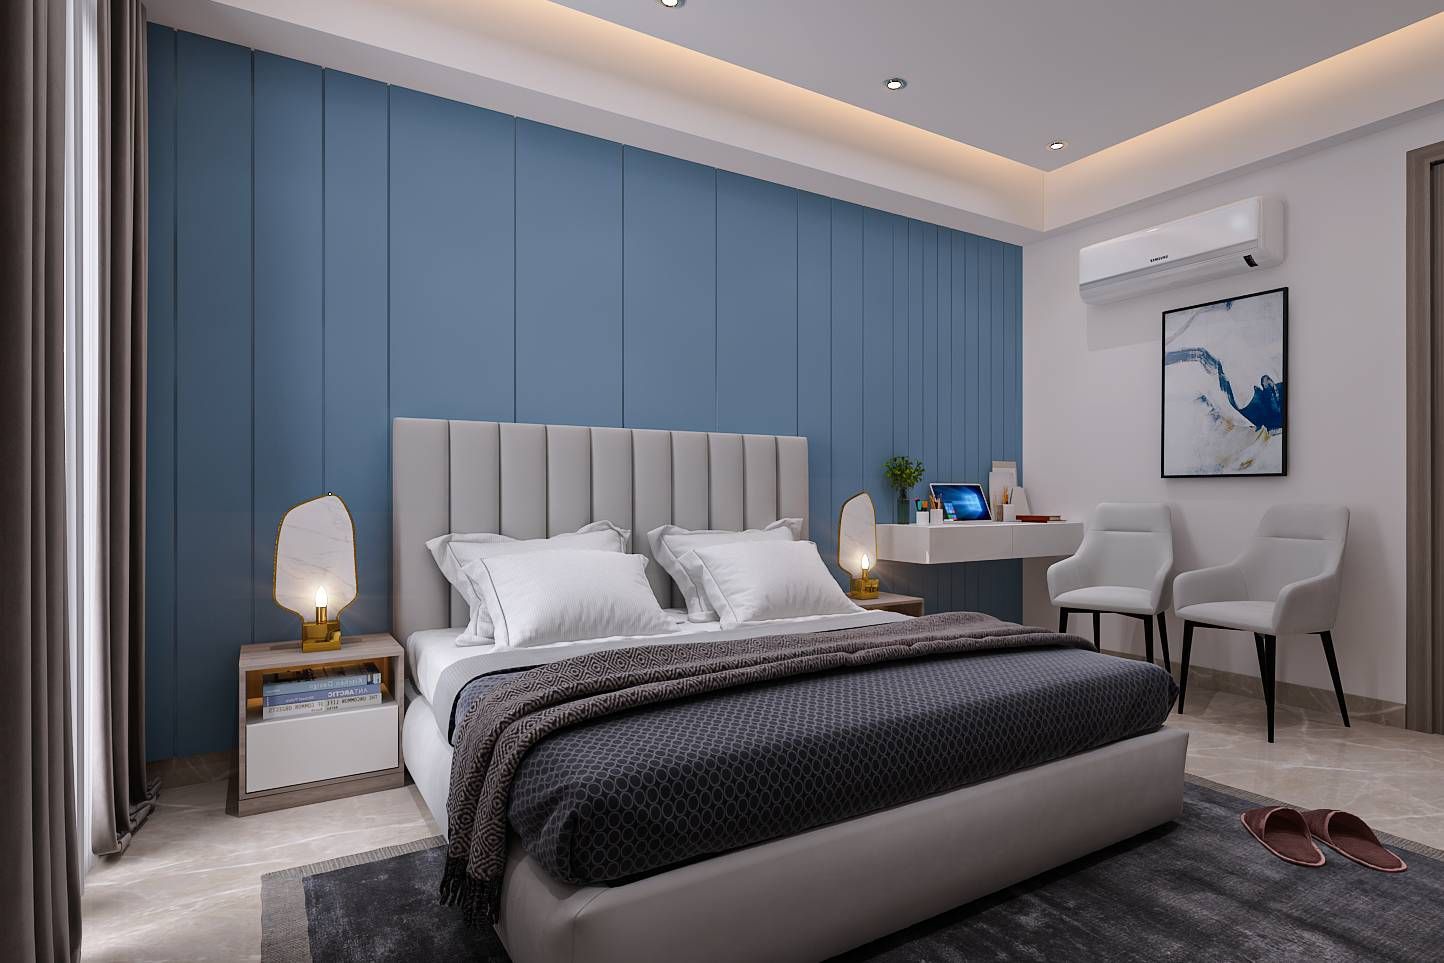 Compact Guest Bedroom Design With Aesthetic Blue Accent Wall